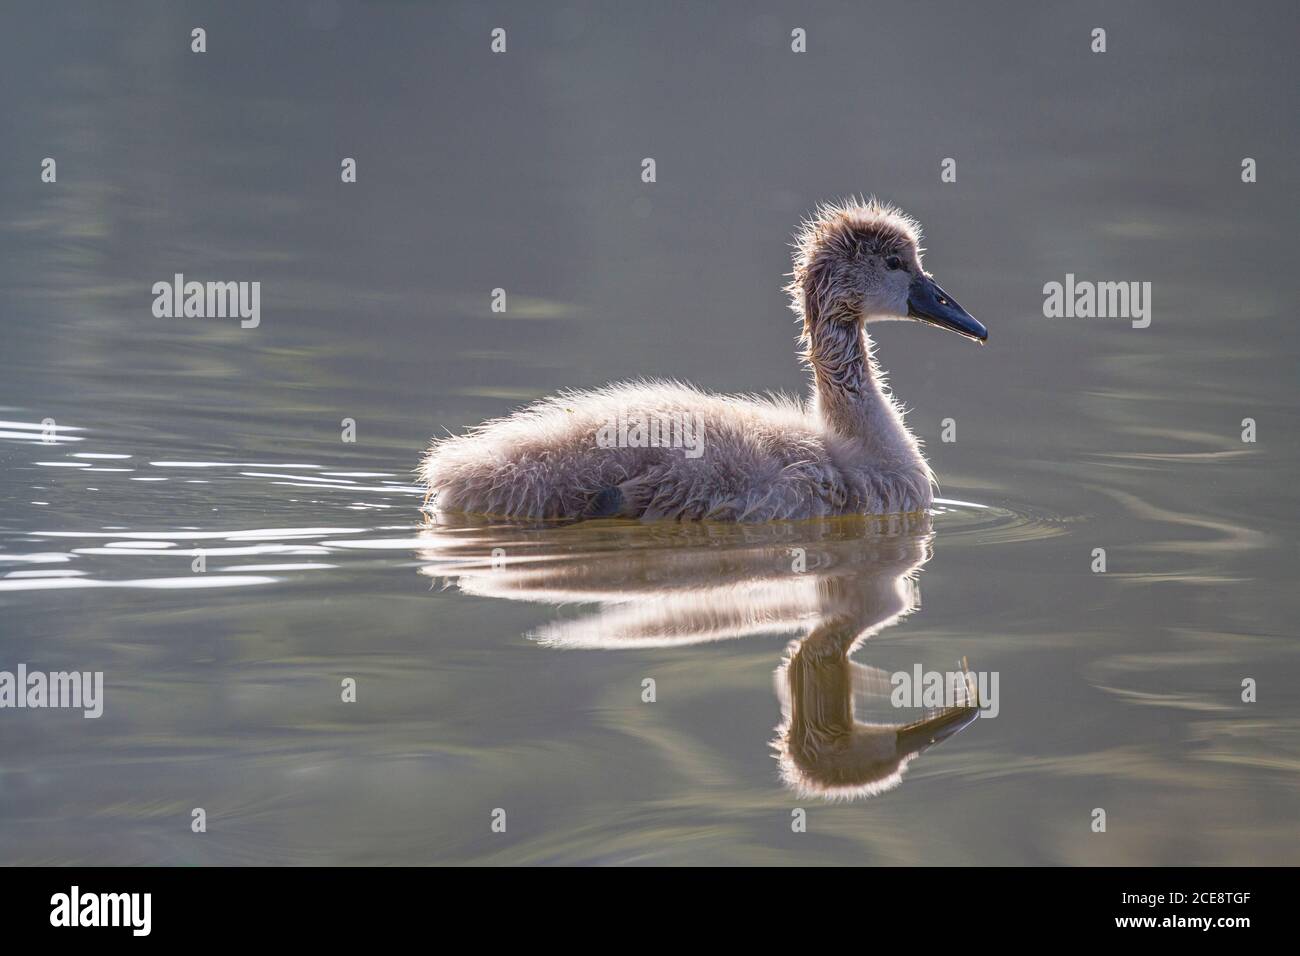 A cygnet reflected in the water. Stock Photo